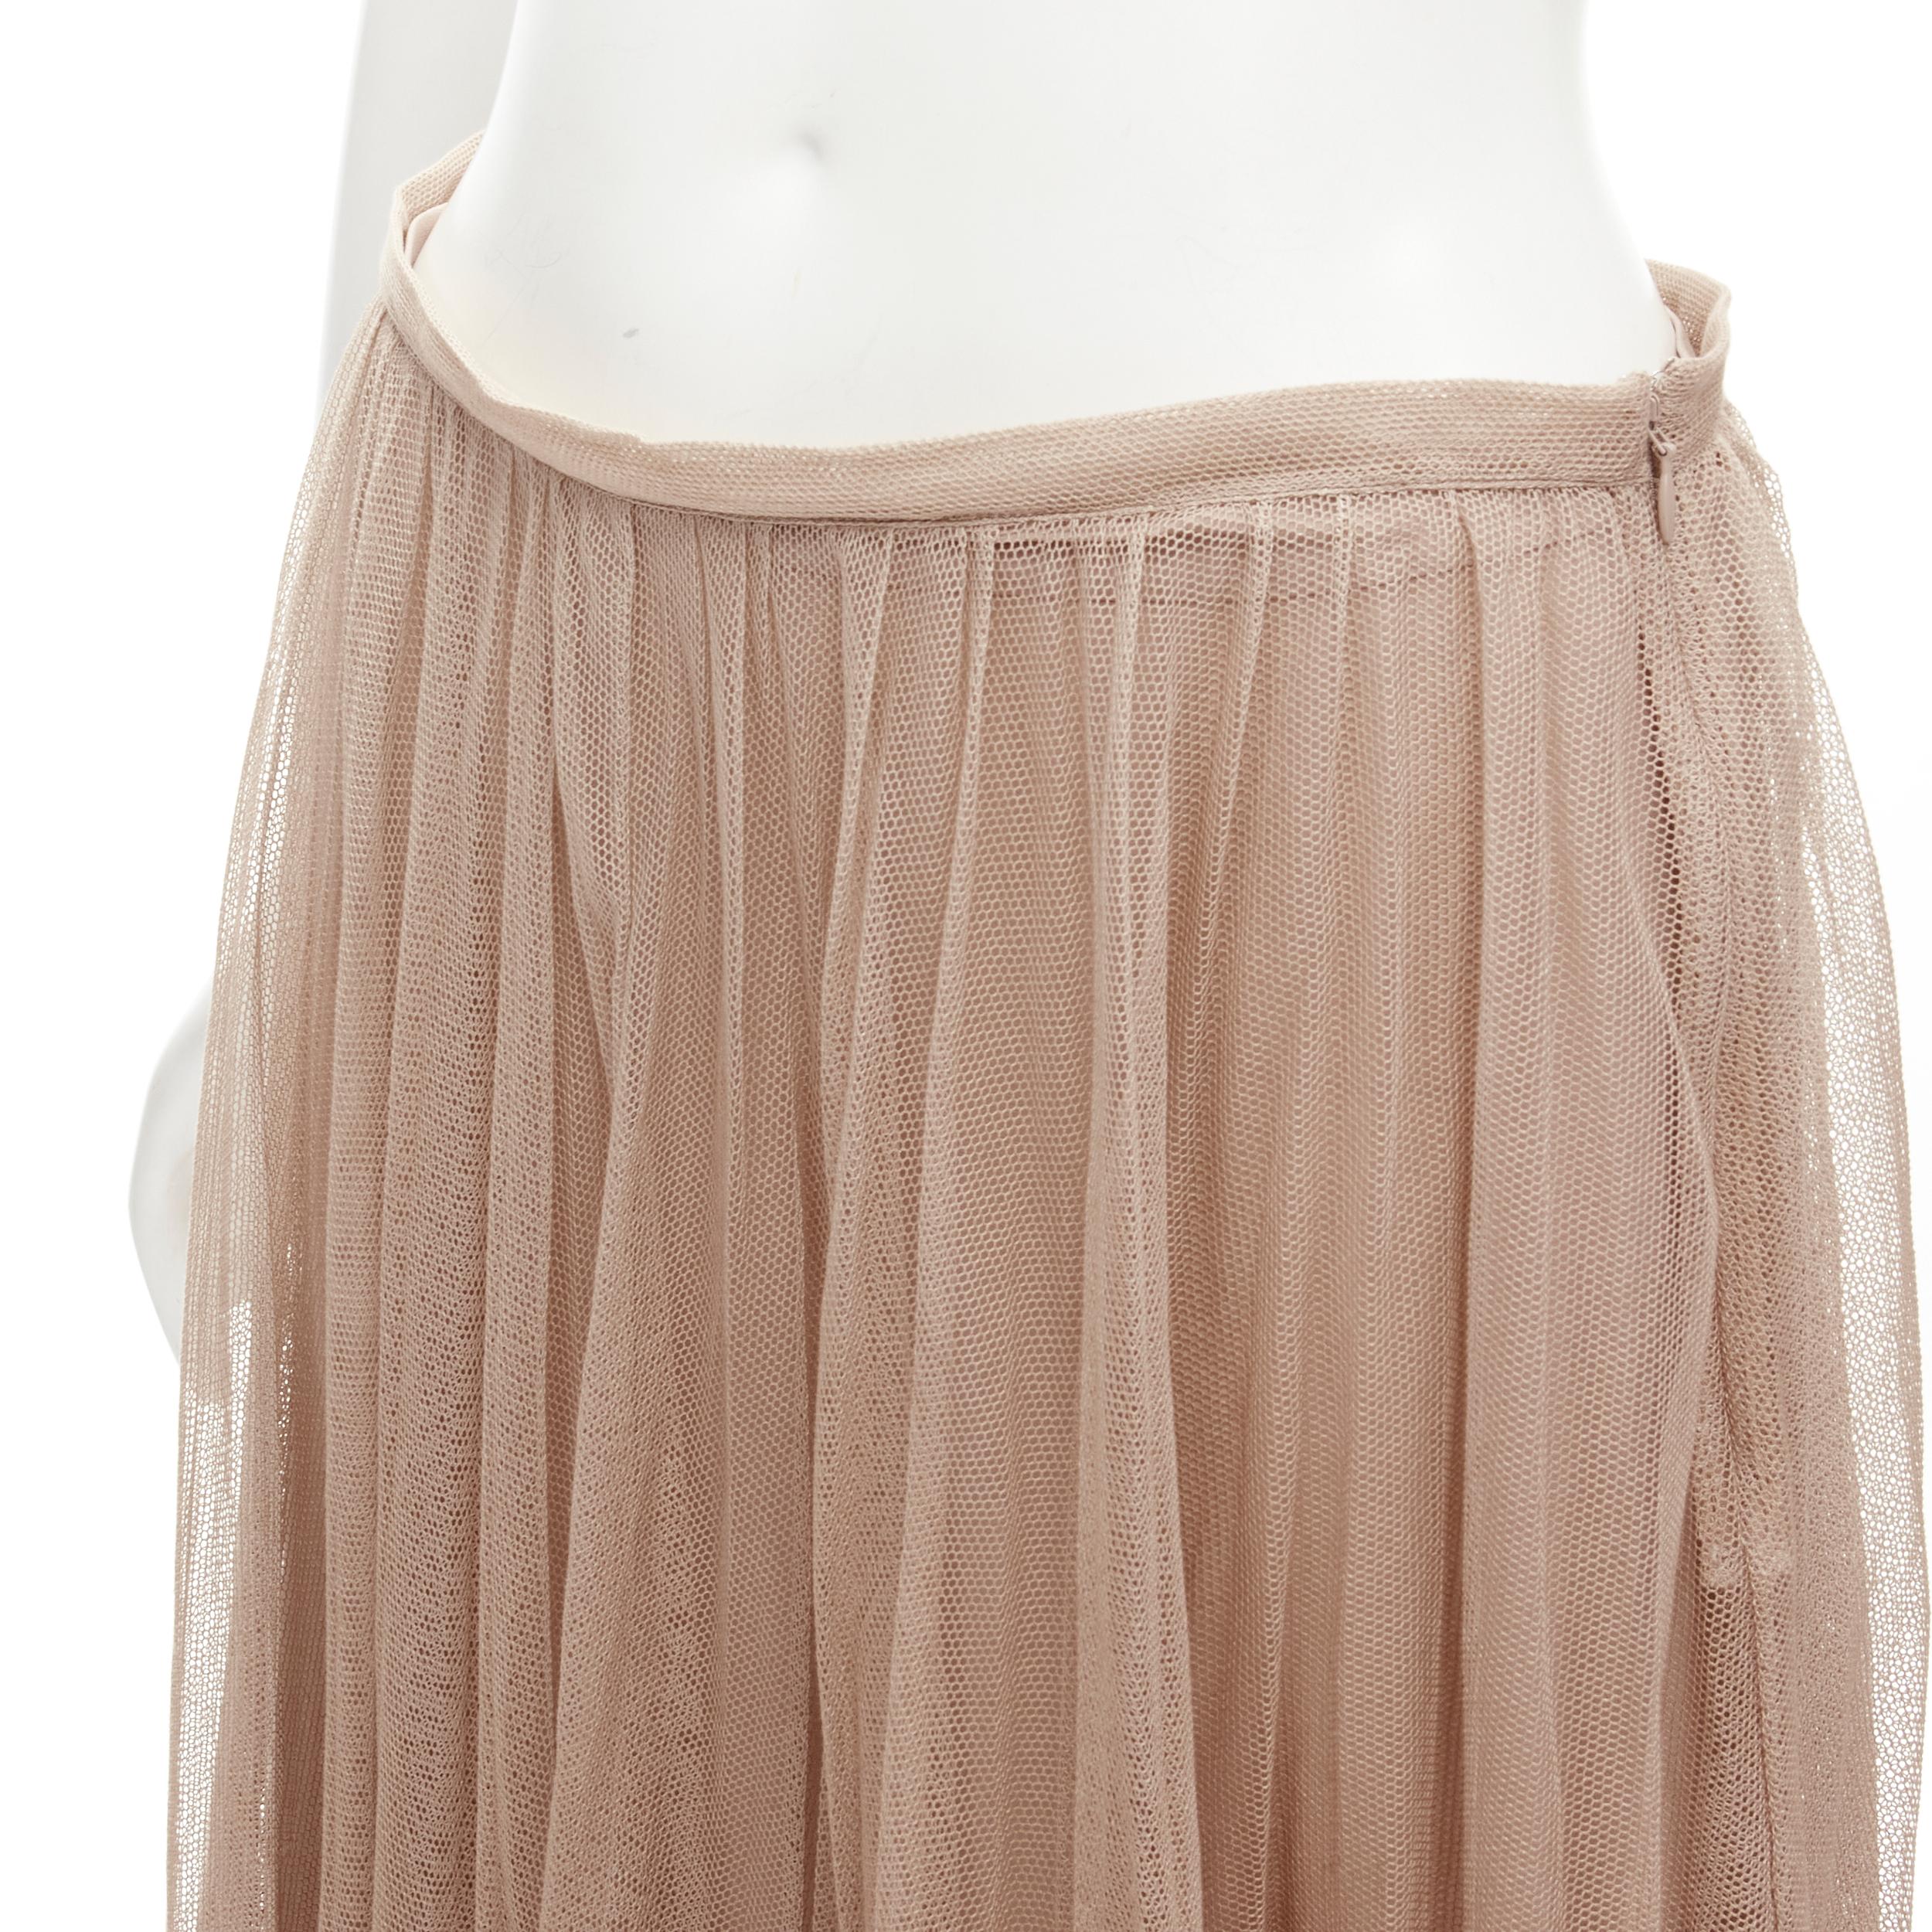 CHRISTIAN DIOR blush beige mesh pleated tulle layered skirt FR40 M
Reference: KNLM/A00209
Brand: Christian Dior
Material: Silk
Color: Beige
Pattern: Solid
Closure: Zip
Lining: Silk
Extra Details: Mesh pleated outer skirt. Fully lined in blush pink